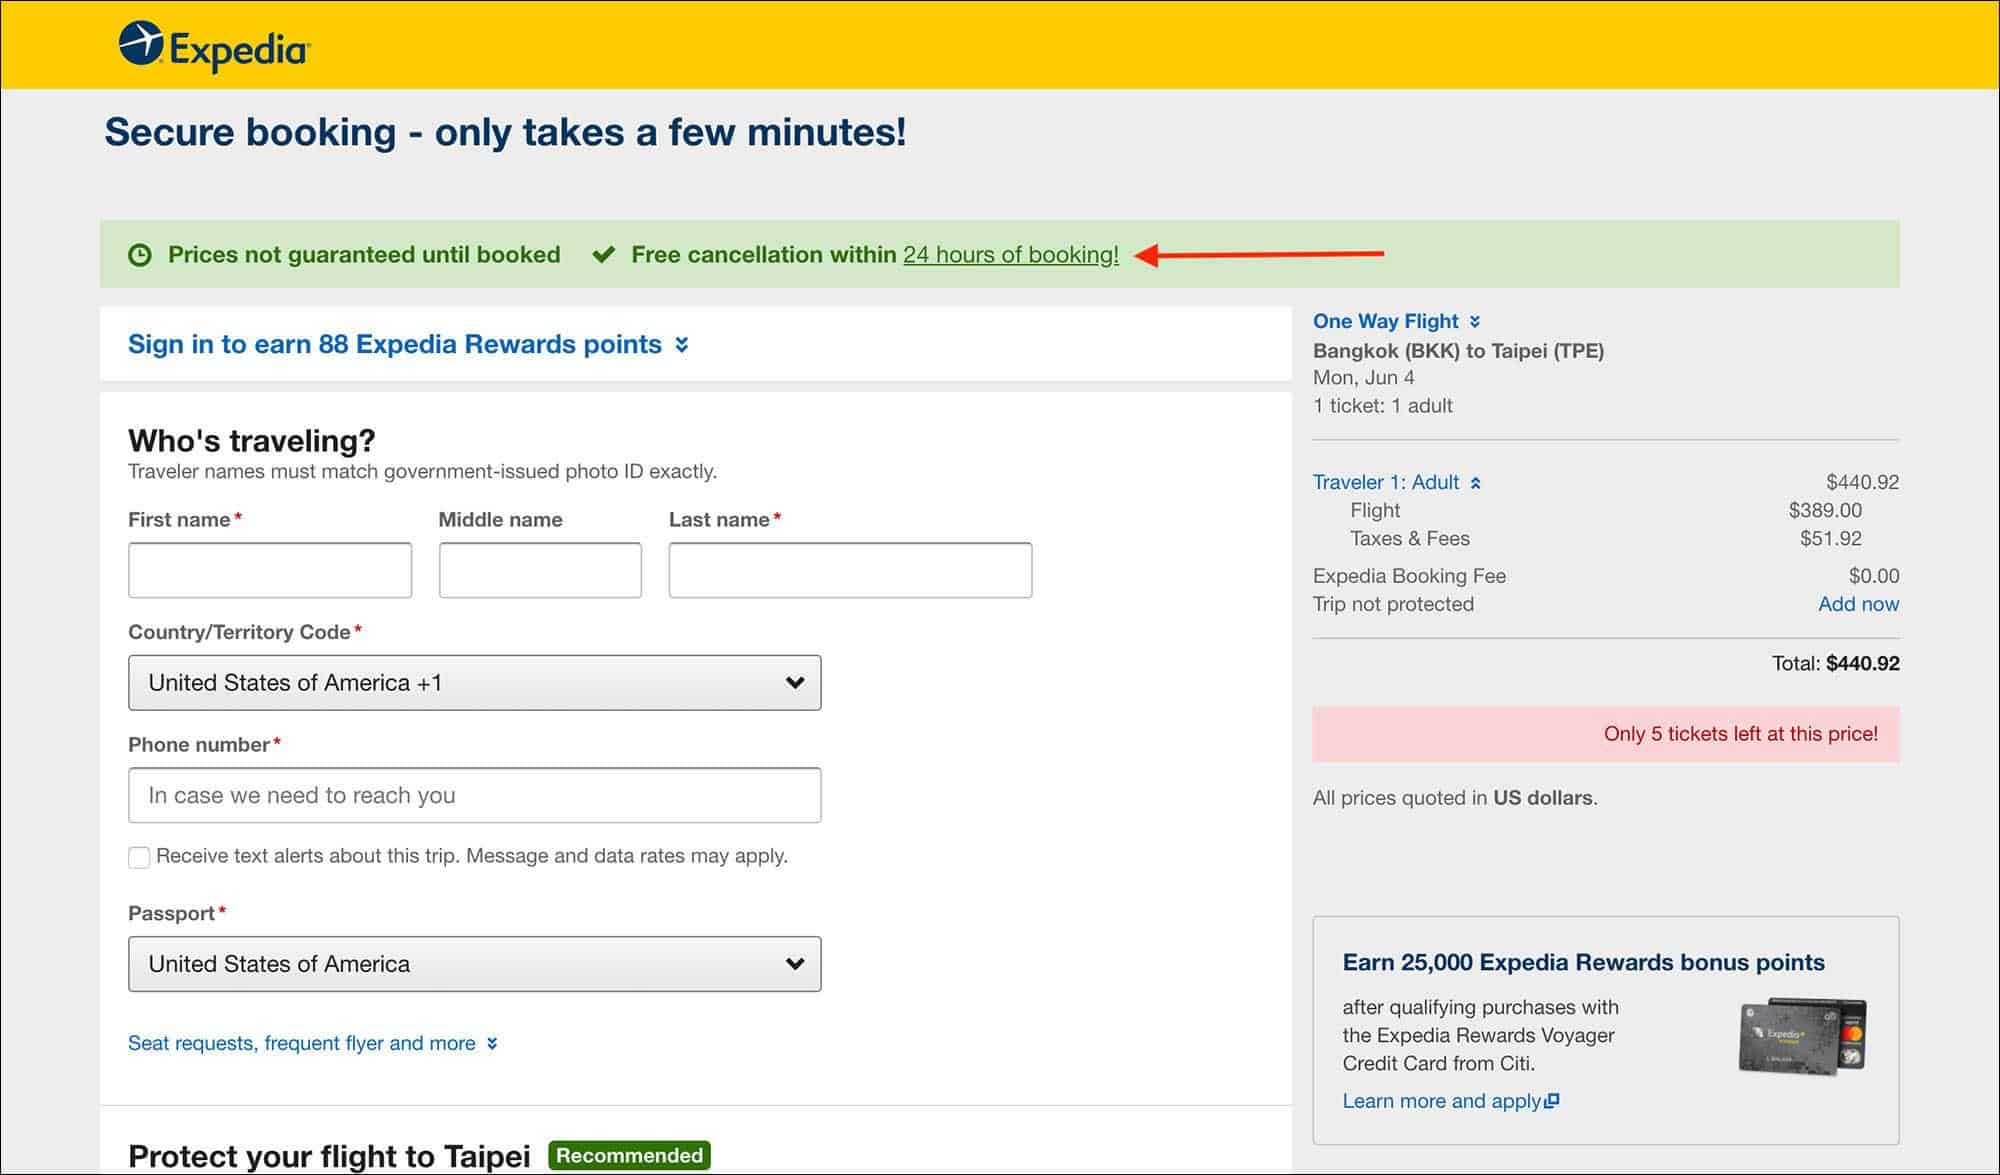 Book Flight Tickets with 24 hour FREE cancellation on Expedia - Complete Flight Booking